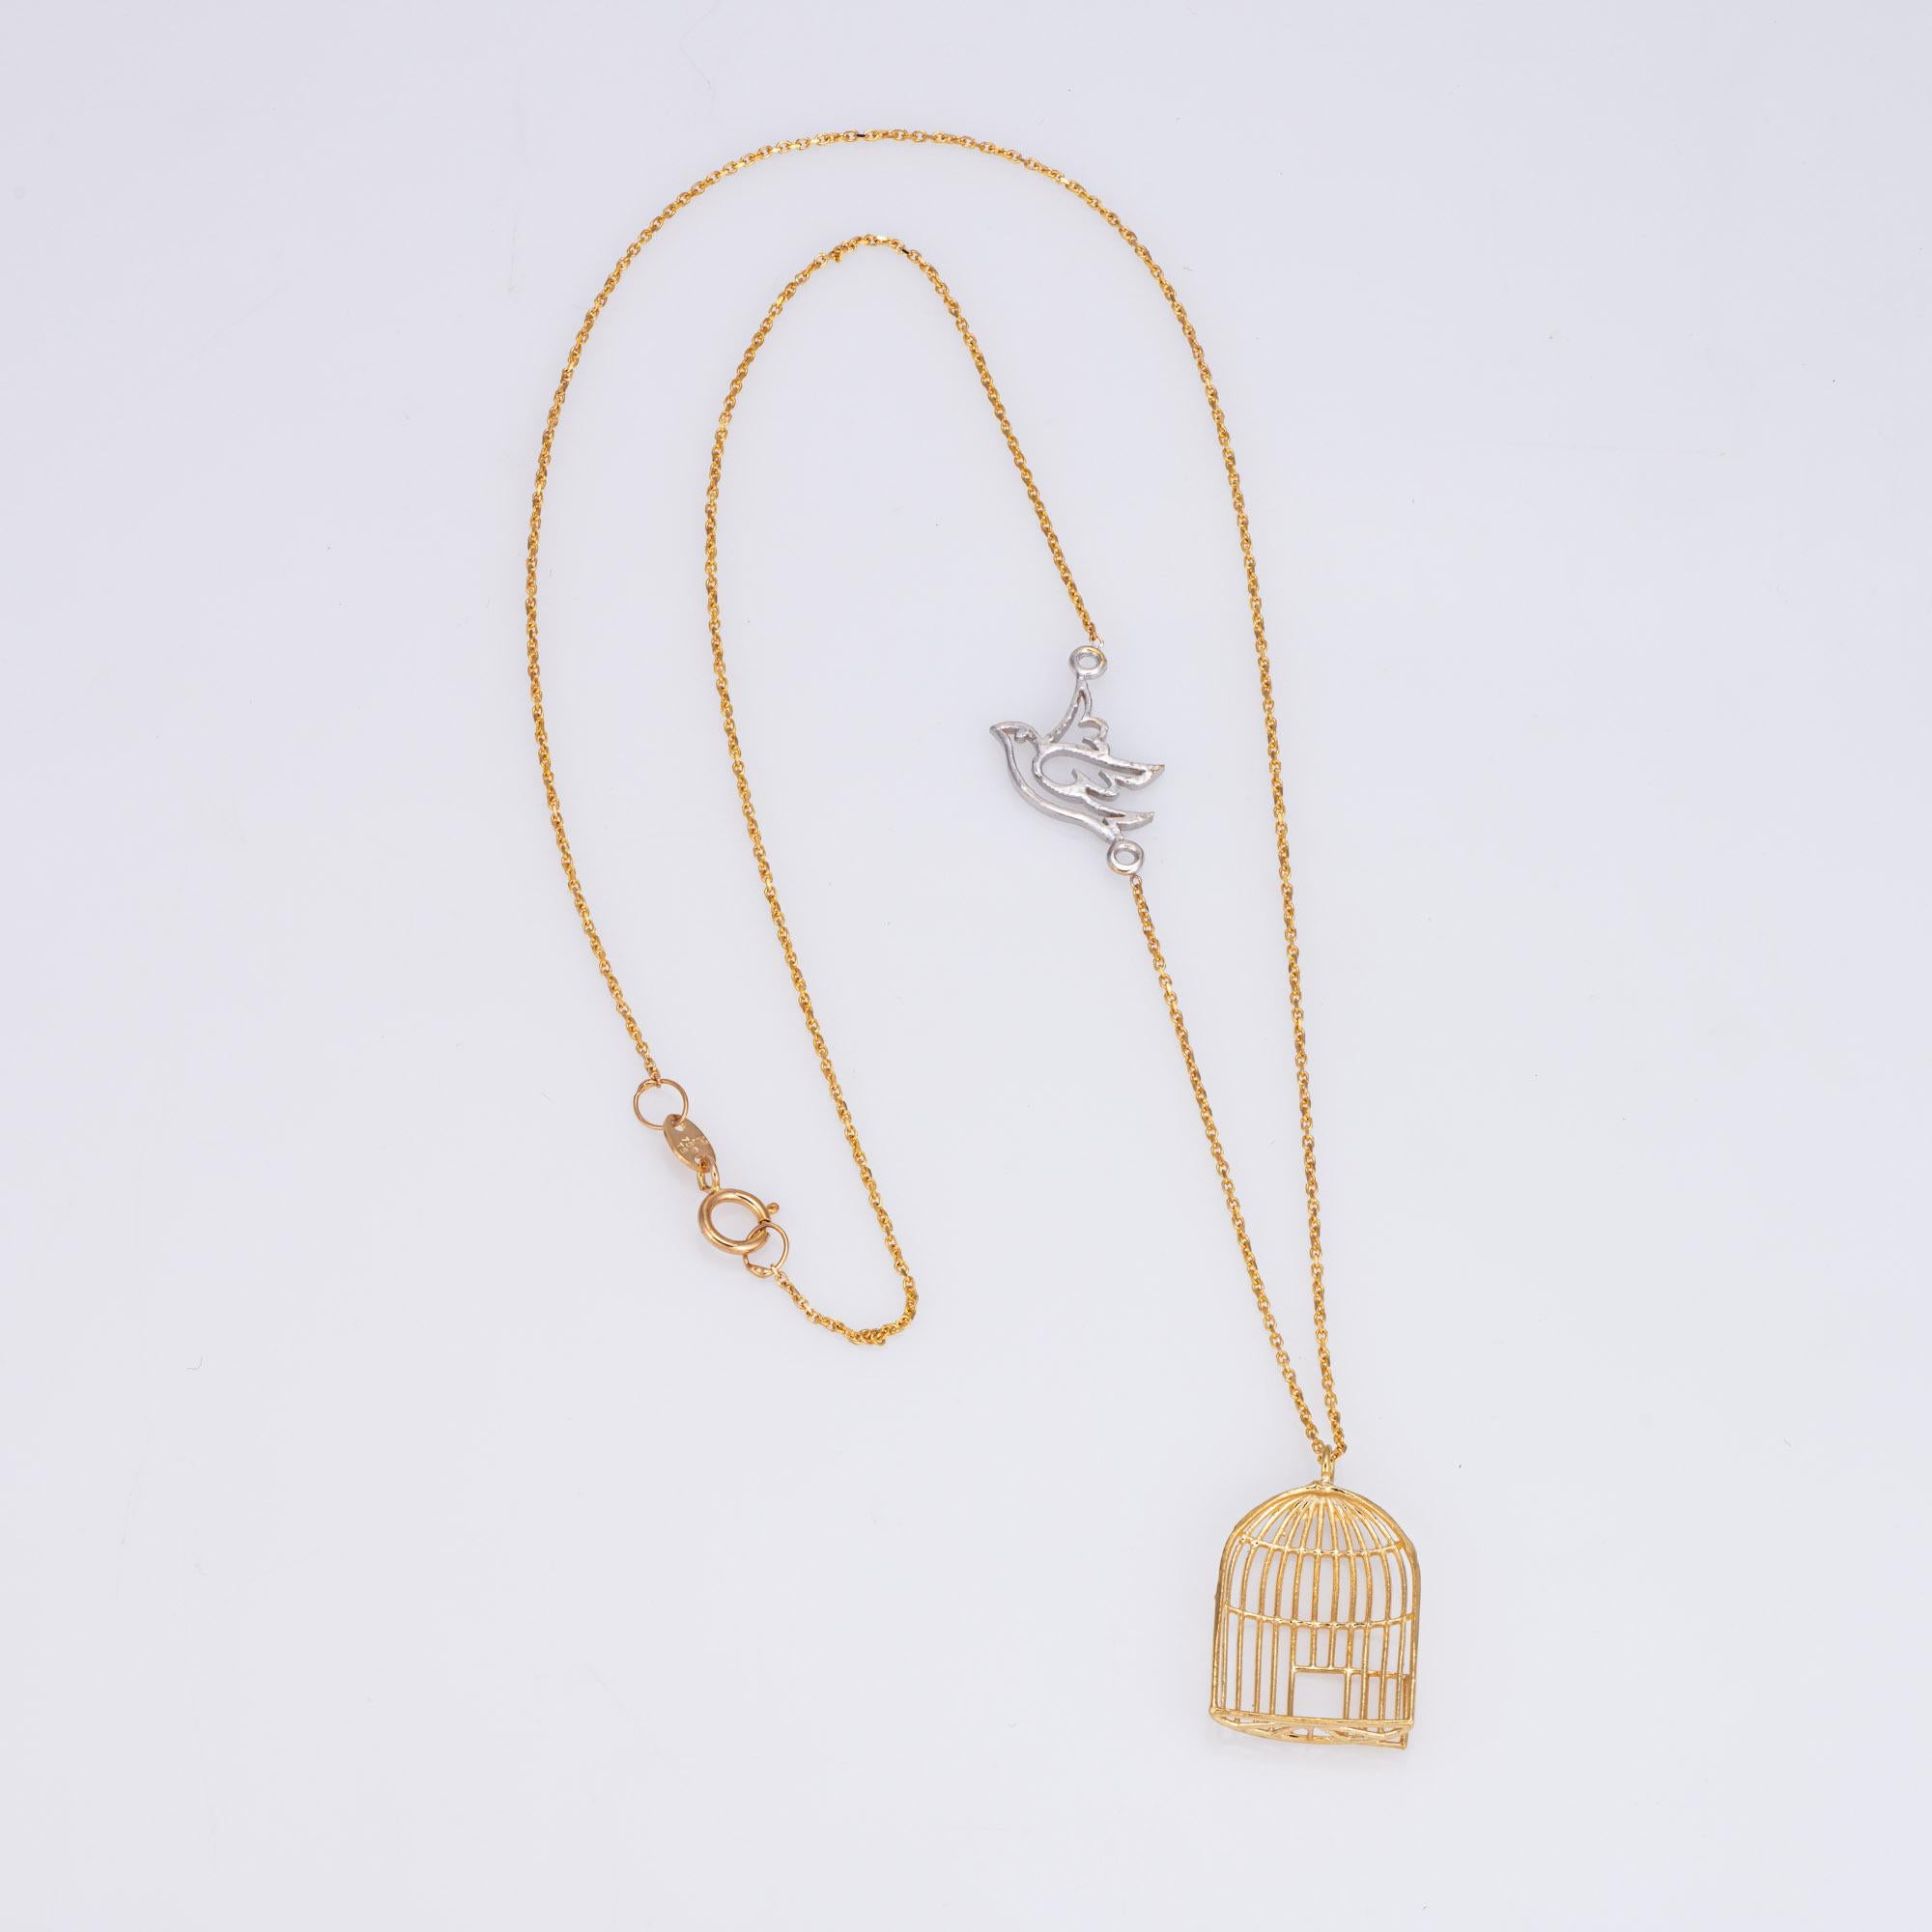 Stylish and finely detailed necklace crafted in 18k yellow gold.  

The symbolic necklace highlights an open birdcage with a white gold bird embedded into the chain, as if flying from the cage. The necklace is great worn alone or layered with your